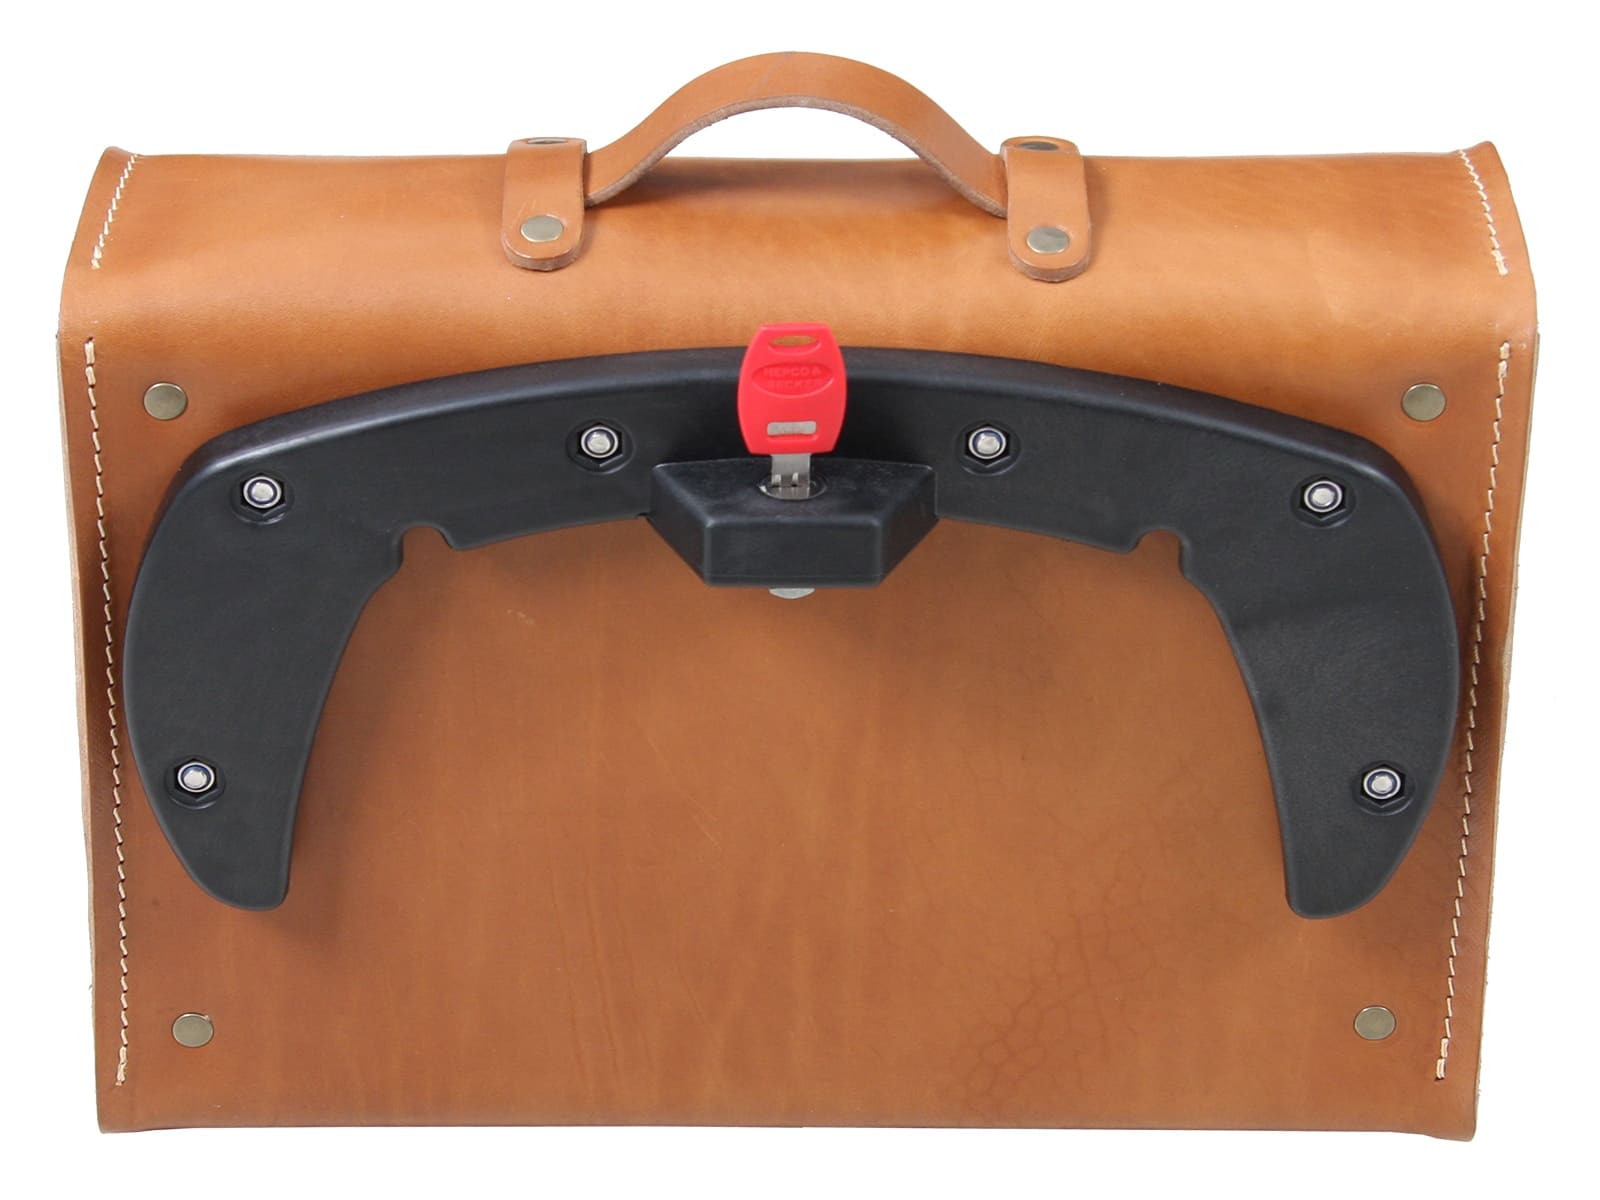 Legacy Leather Briefcase sand brown for C-Bow carrier